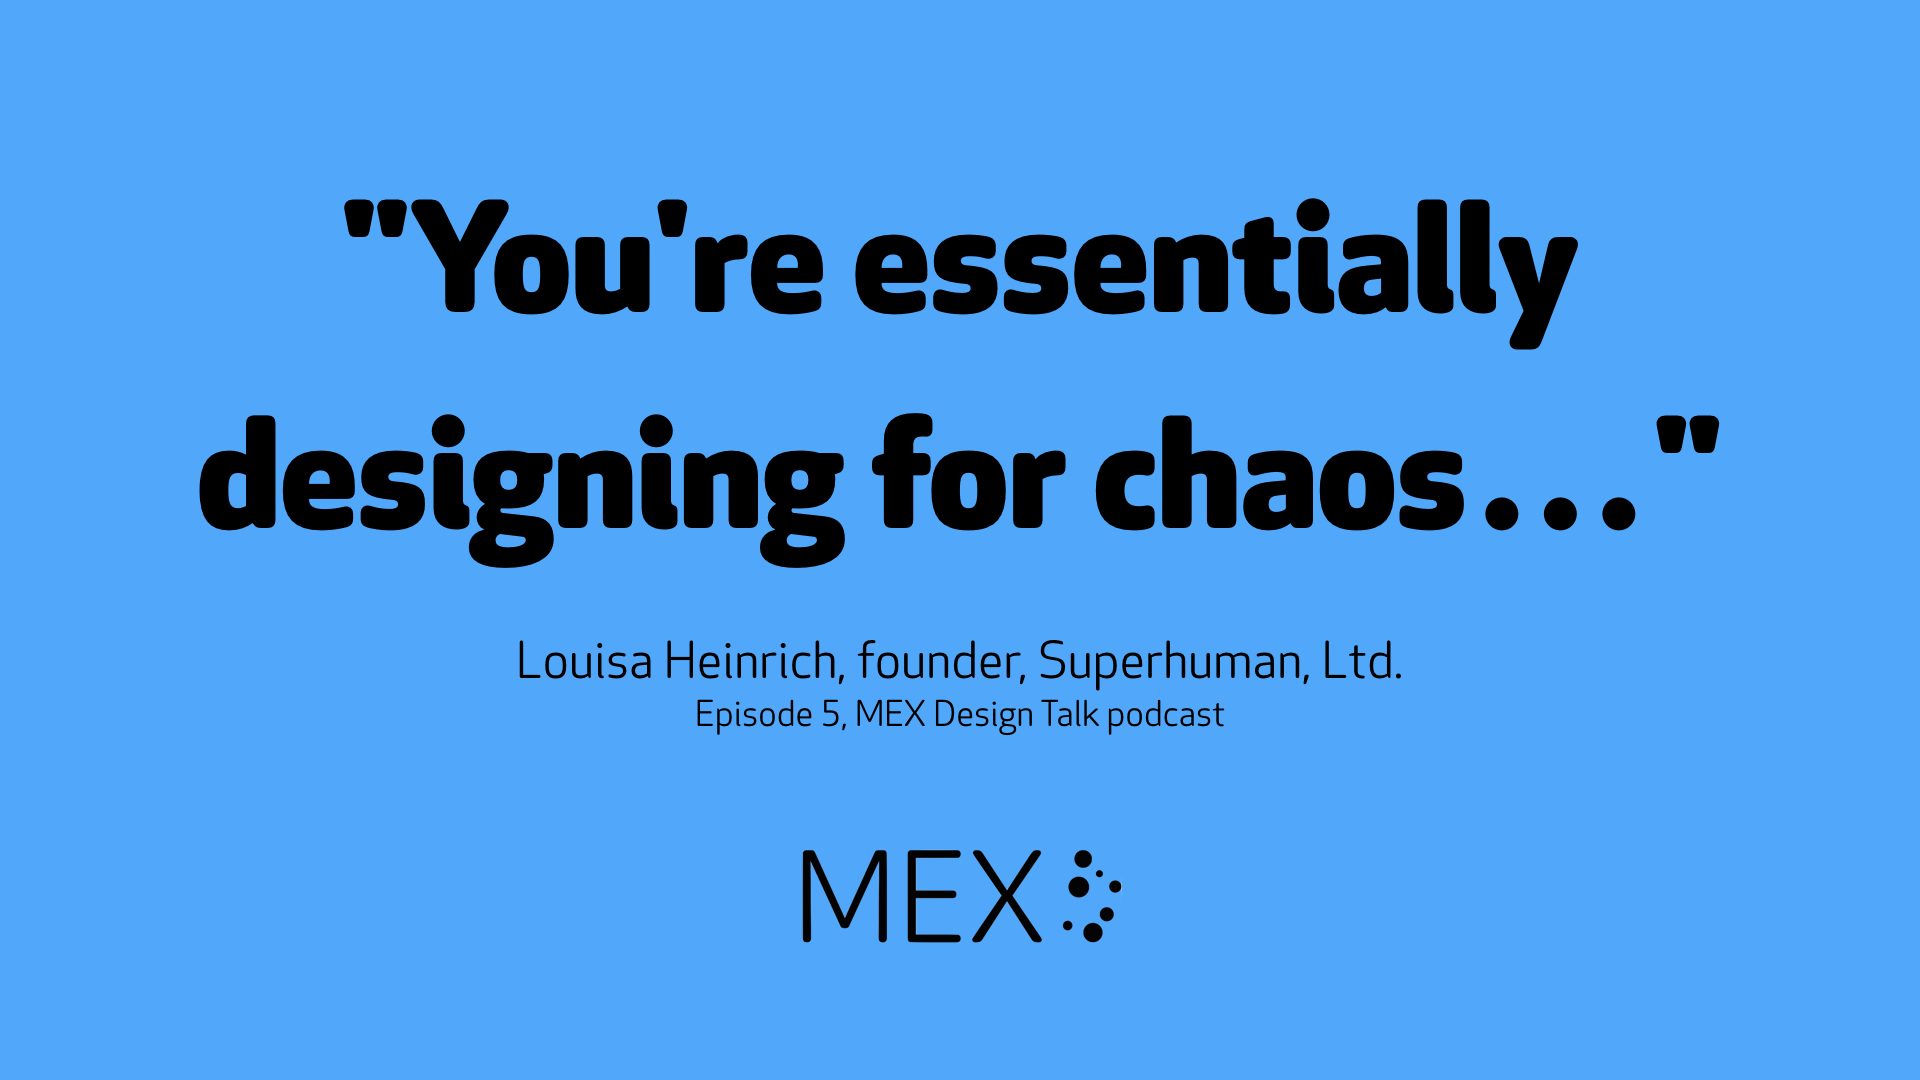 "You're essentially designing for chaos..." Louisa Heinrich on robot & drone UX in episode 5 of the MEX Design Talk Podcast